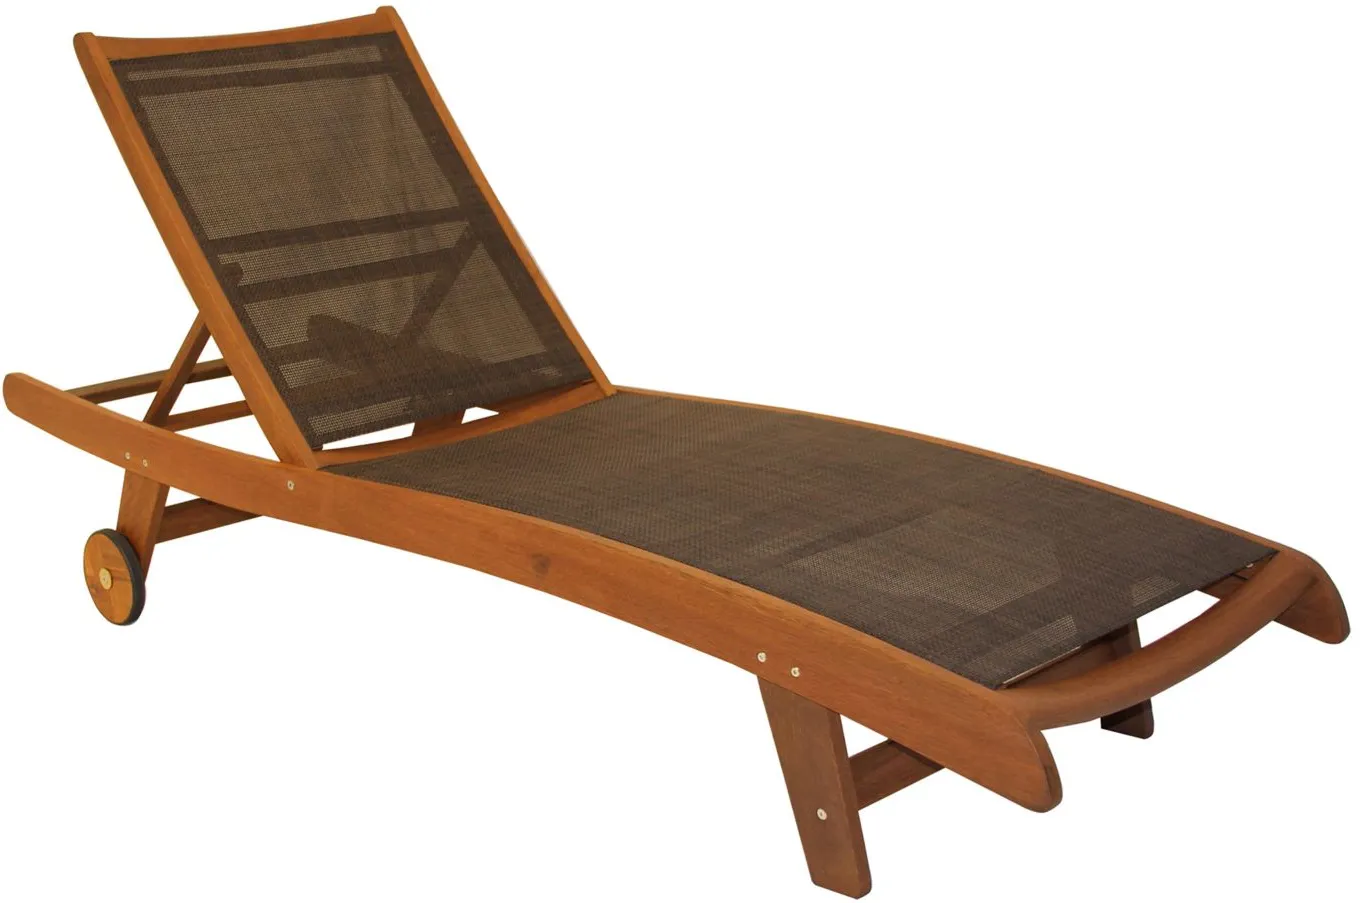 Cheedle Outdoor Reclining Chaise Lounge Chair in Stone by Outdoor Interiors